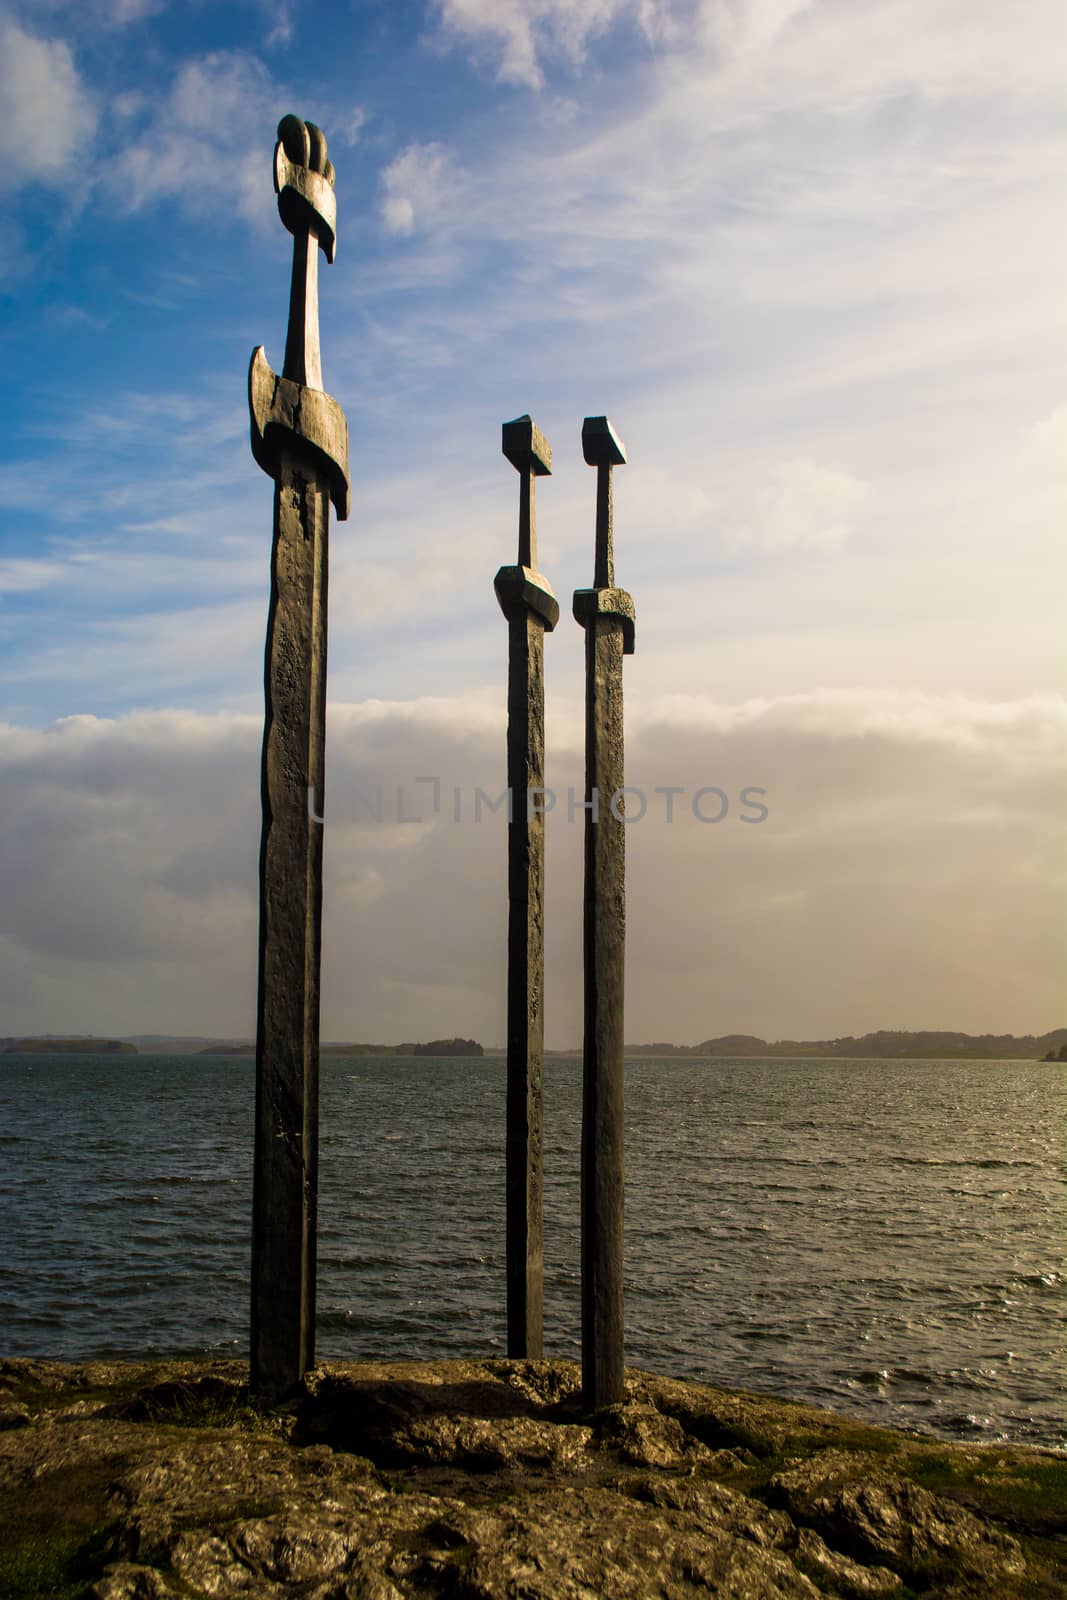 Hafrsfjord, Norway, May 2015: Swords in the rock monument by kb79